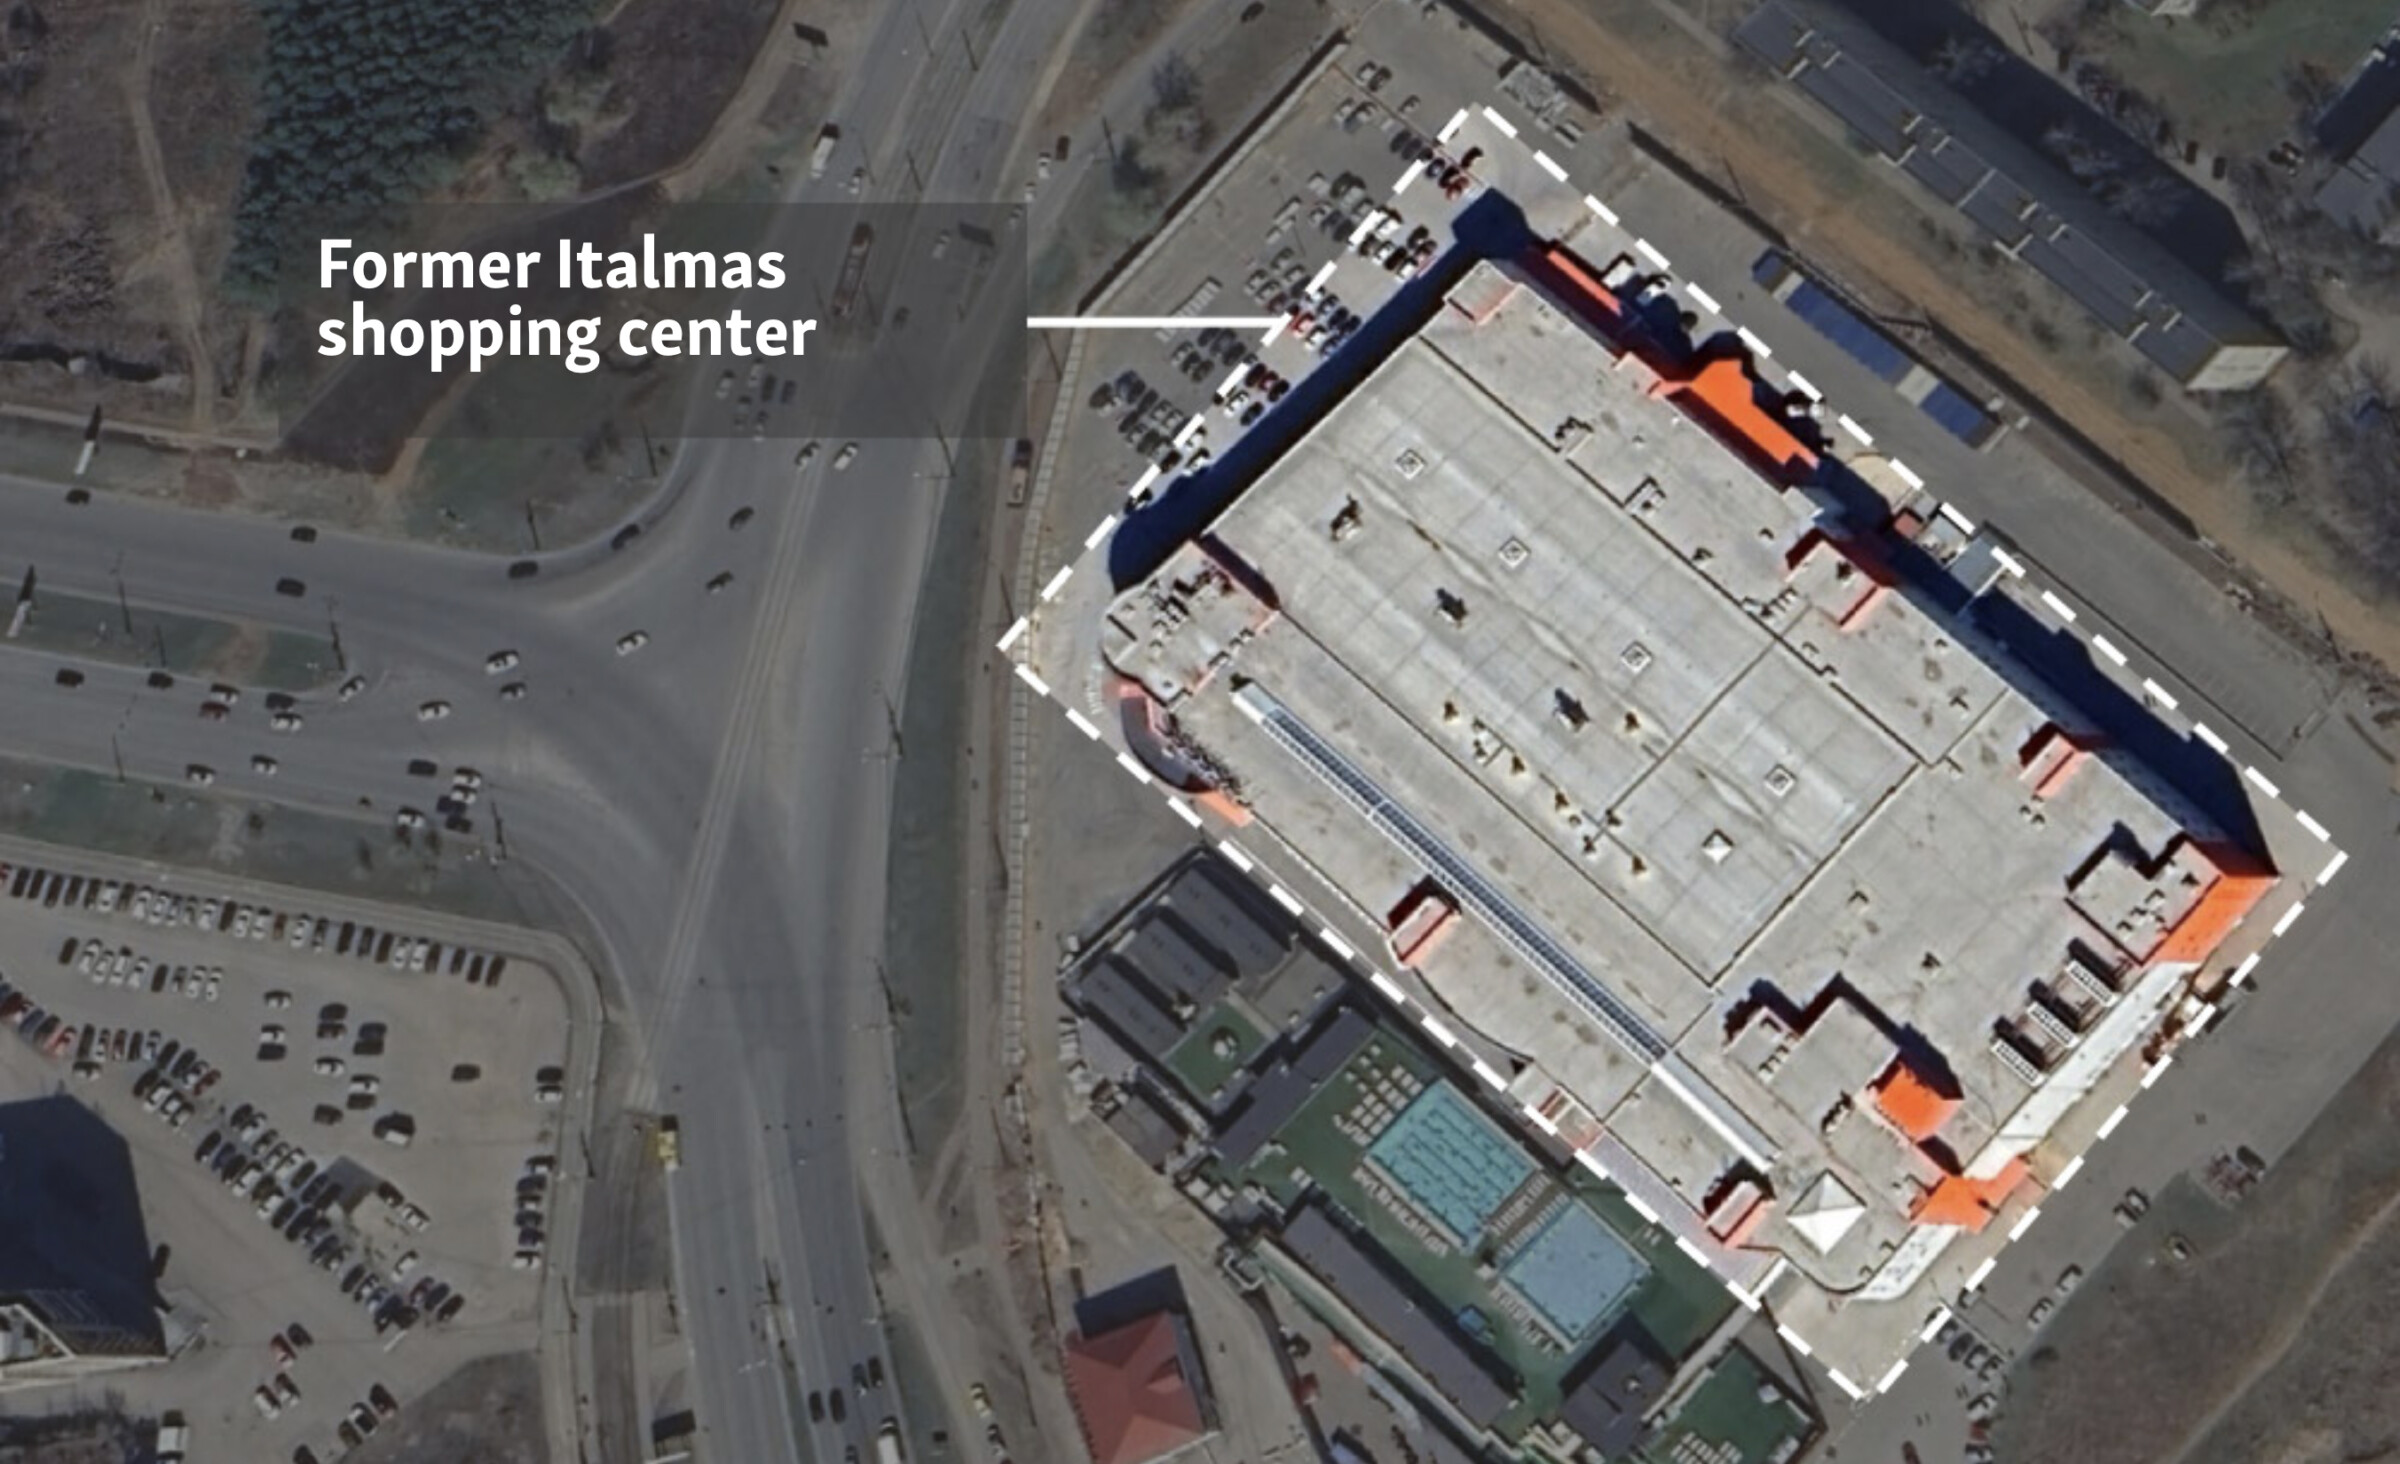 An analysis of satellite images by Schemes suggests that Russia is actively building up its capacity for weapons production and developing new factories.